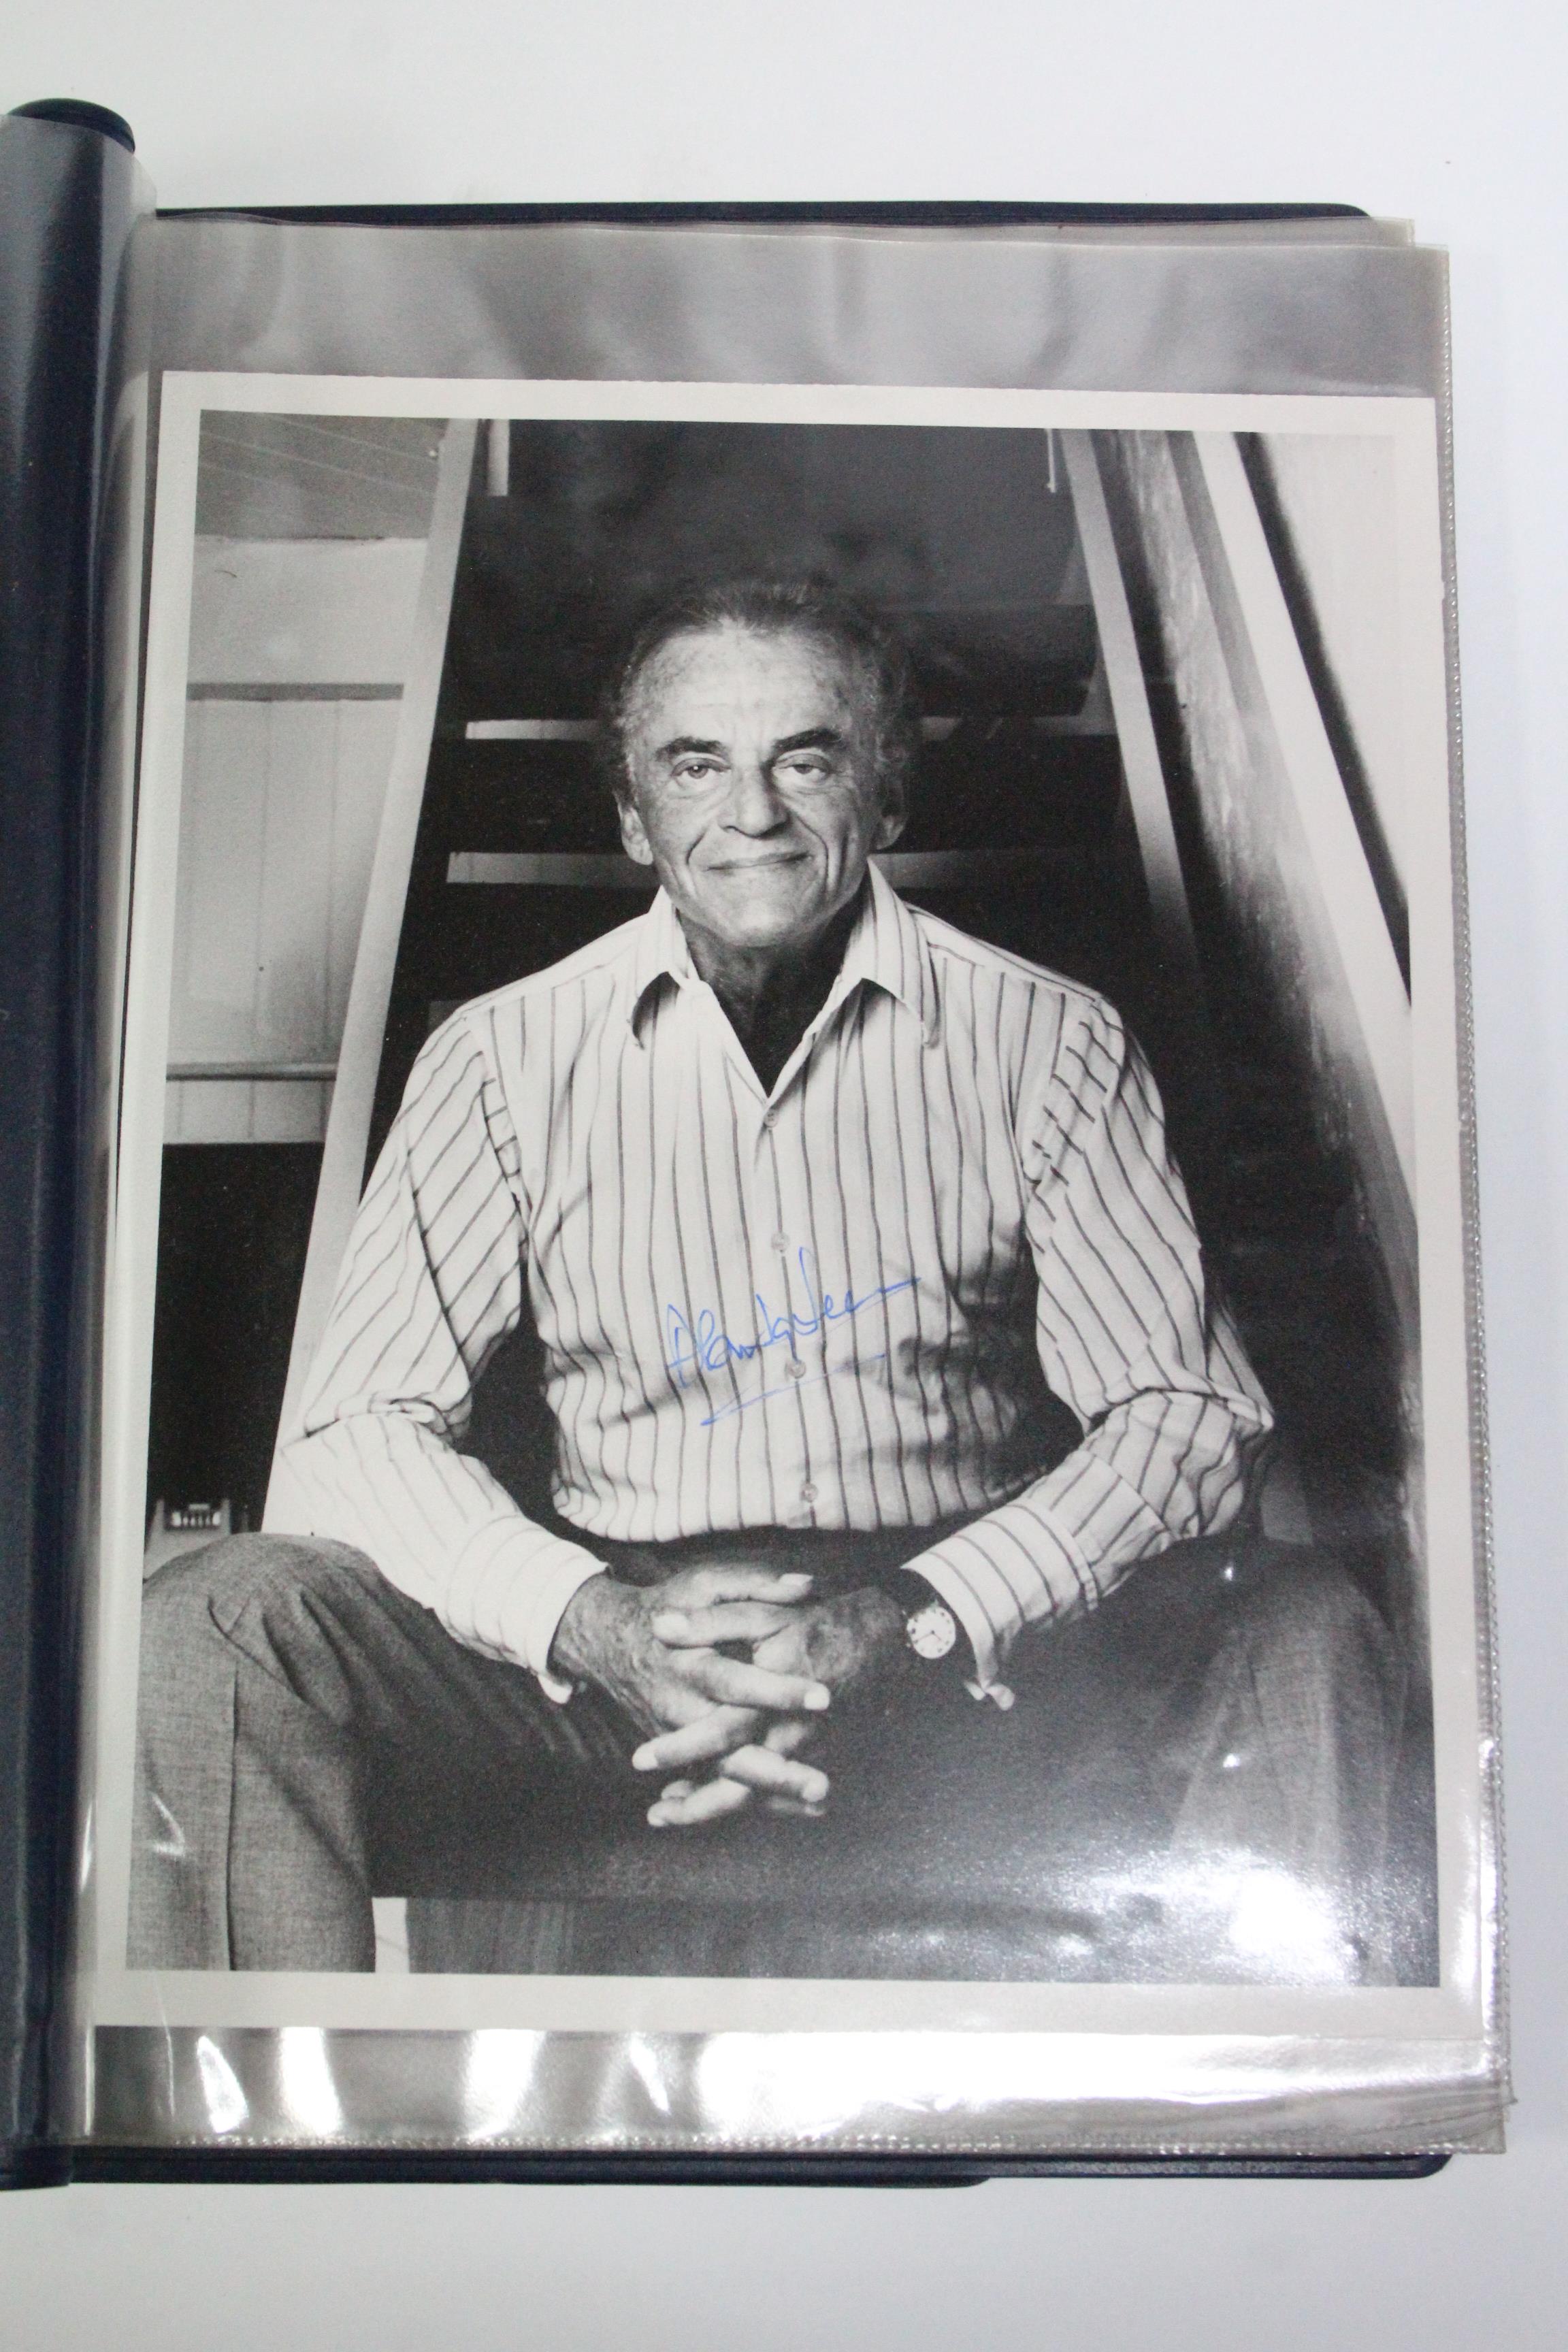 A collection of autographs, most on photographs, including Laurence Olivier, Charlton Heston, - Image 3 of 13